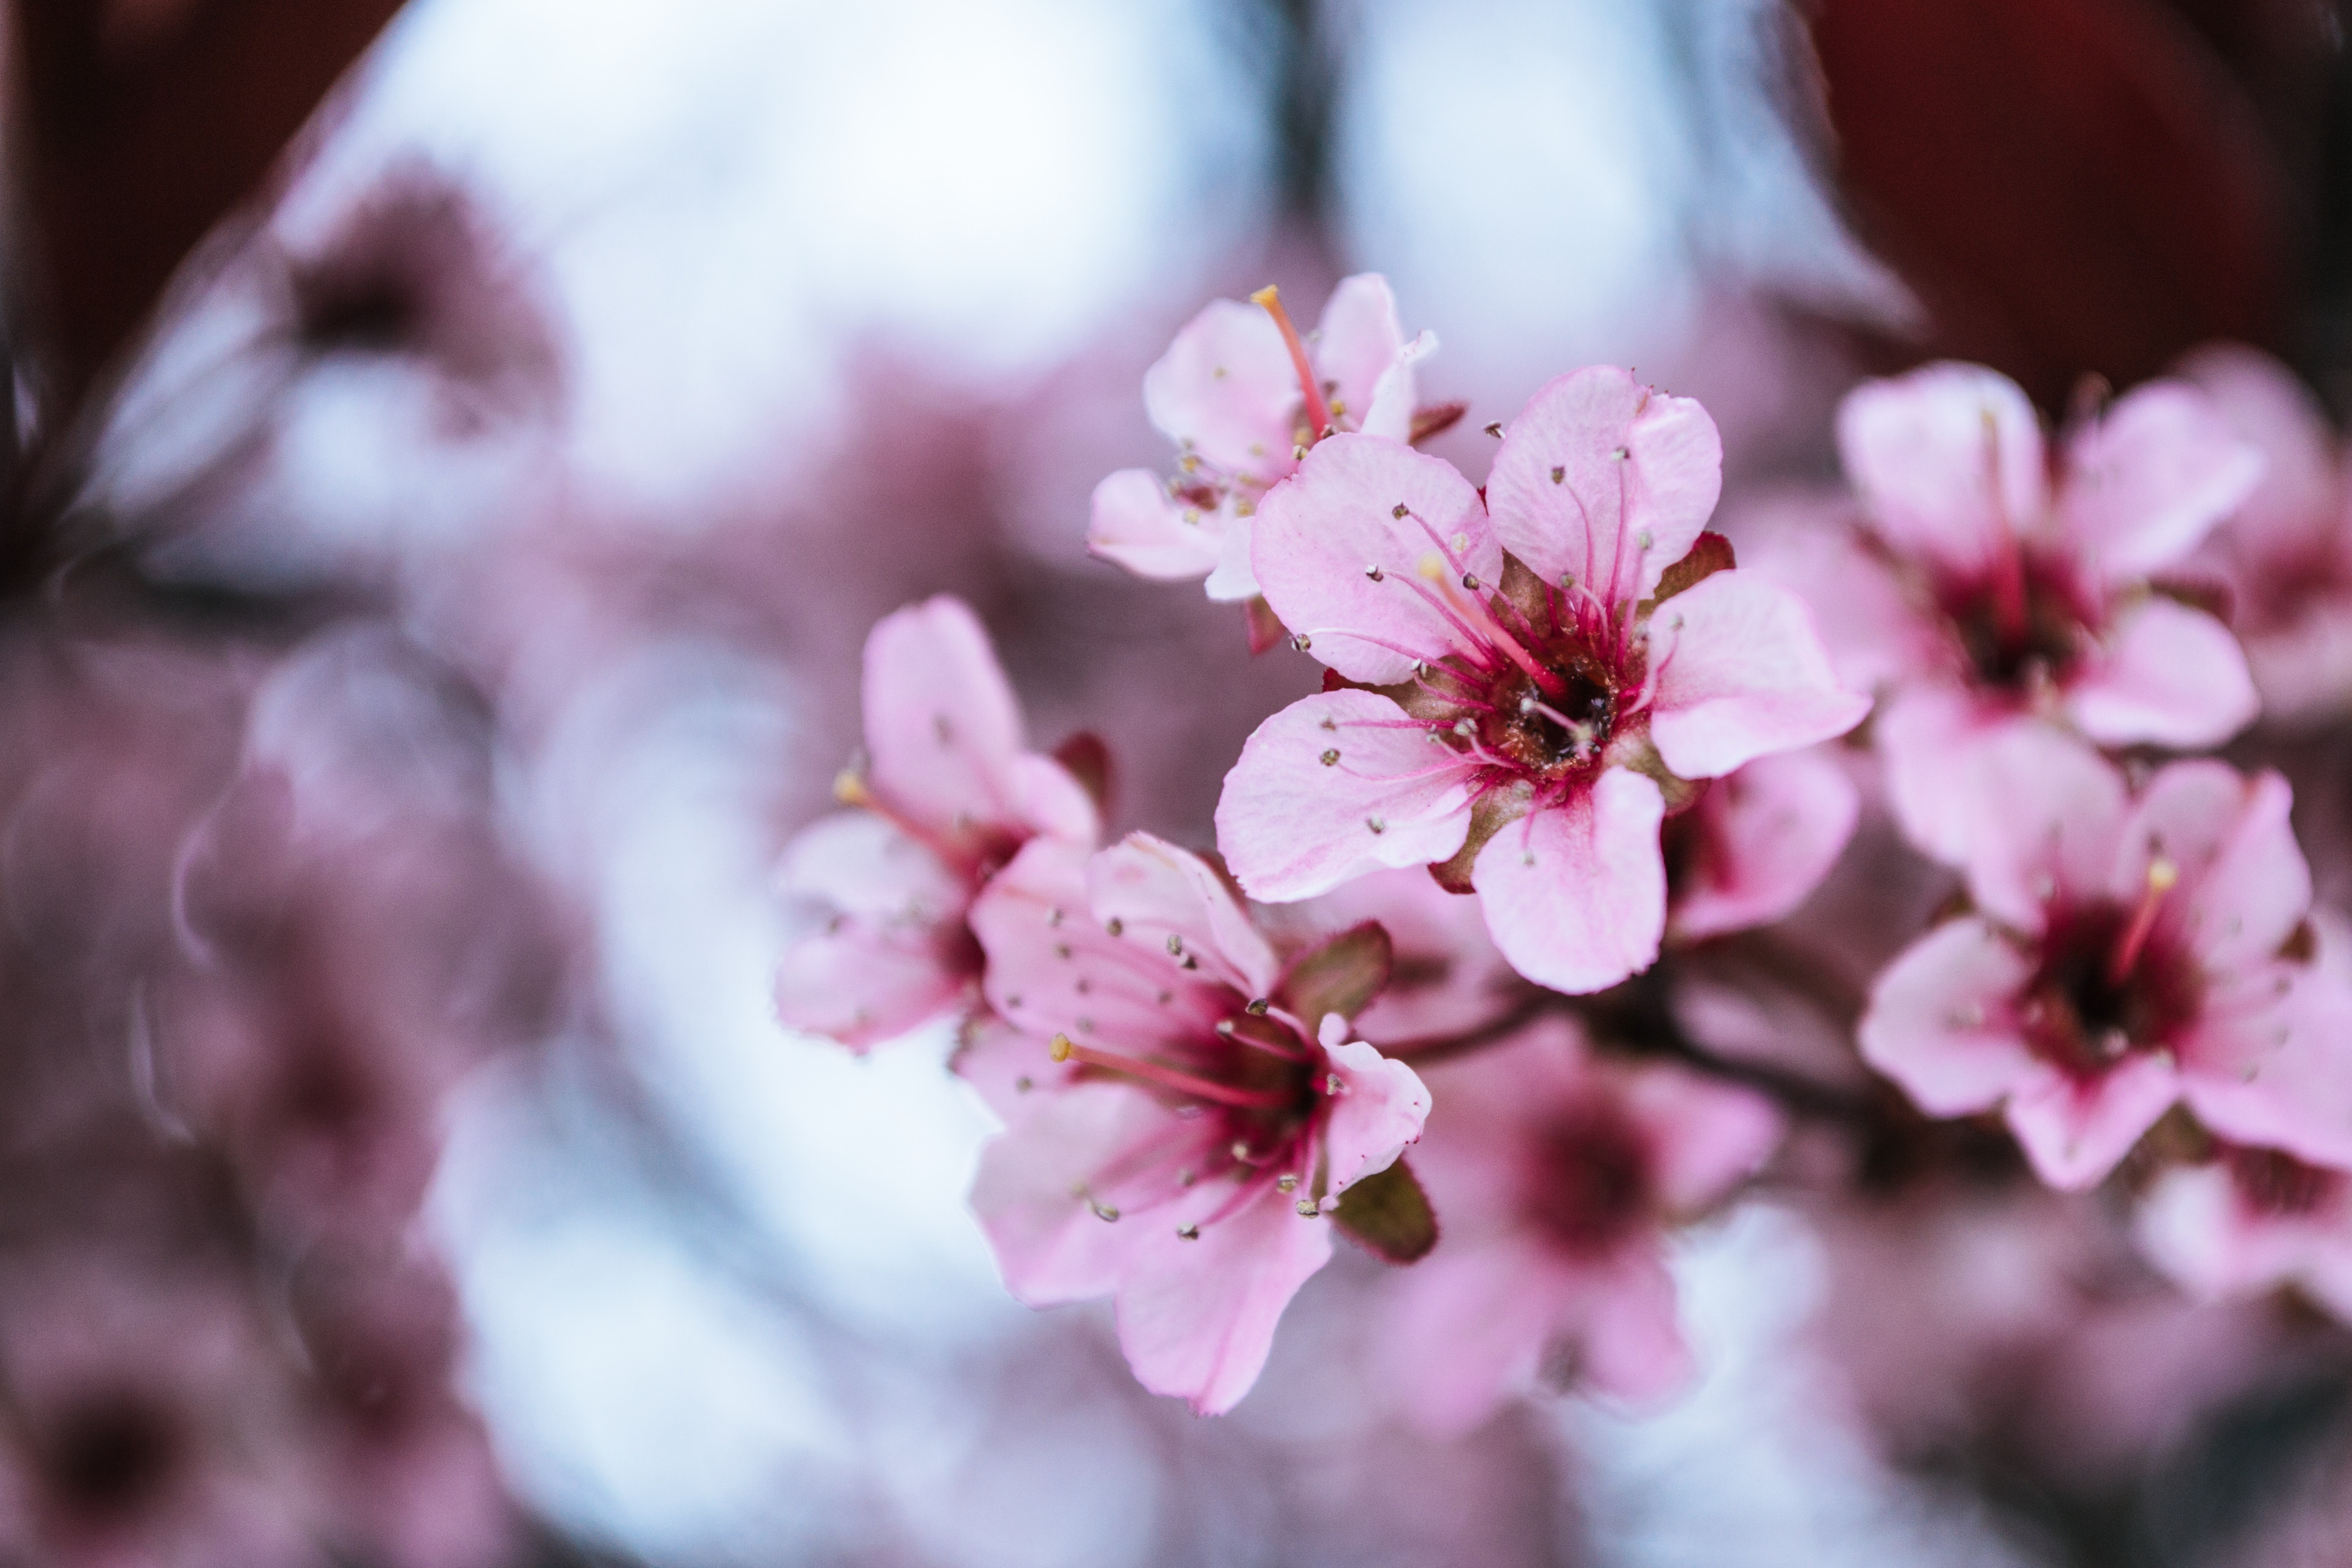 Delicate pink cherry blossoms in the first warm days photo